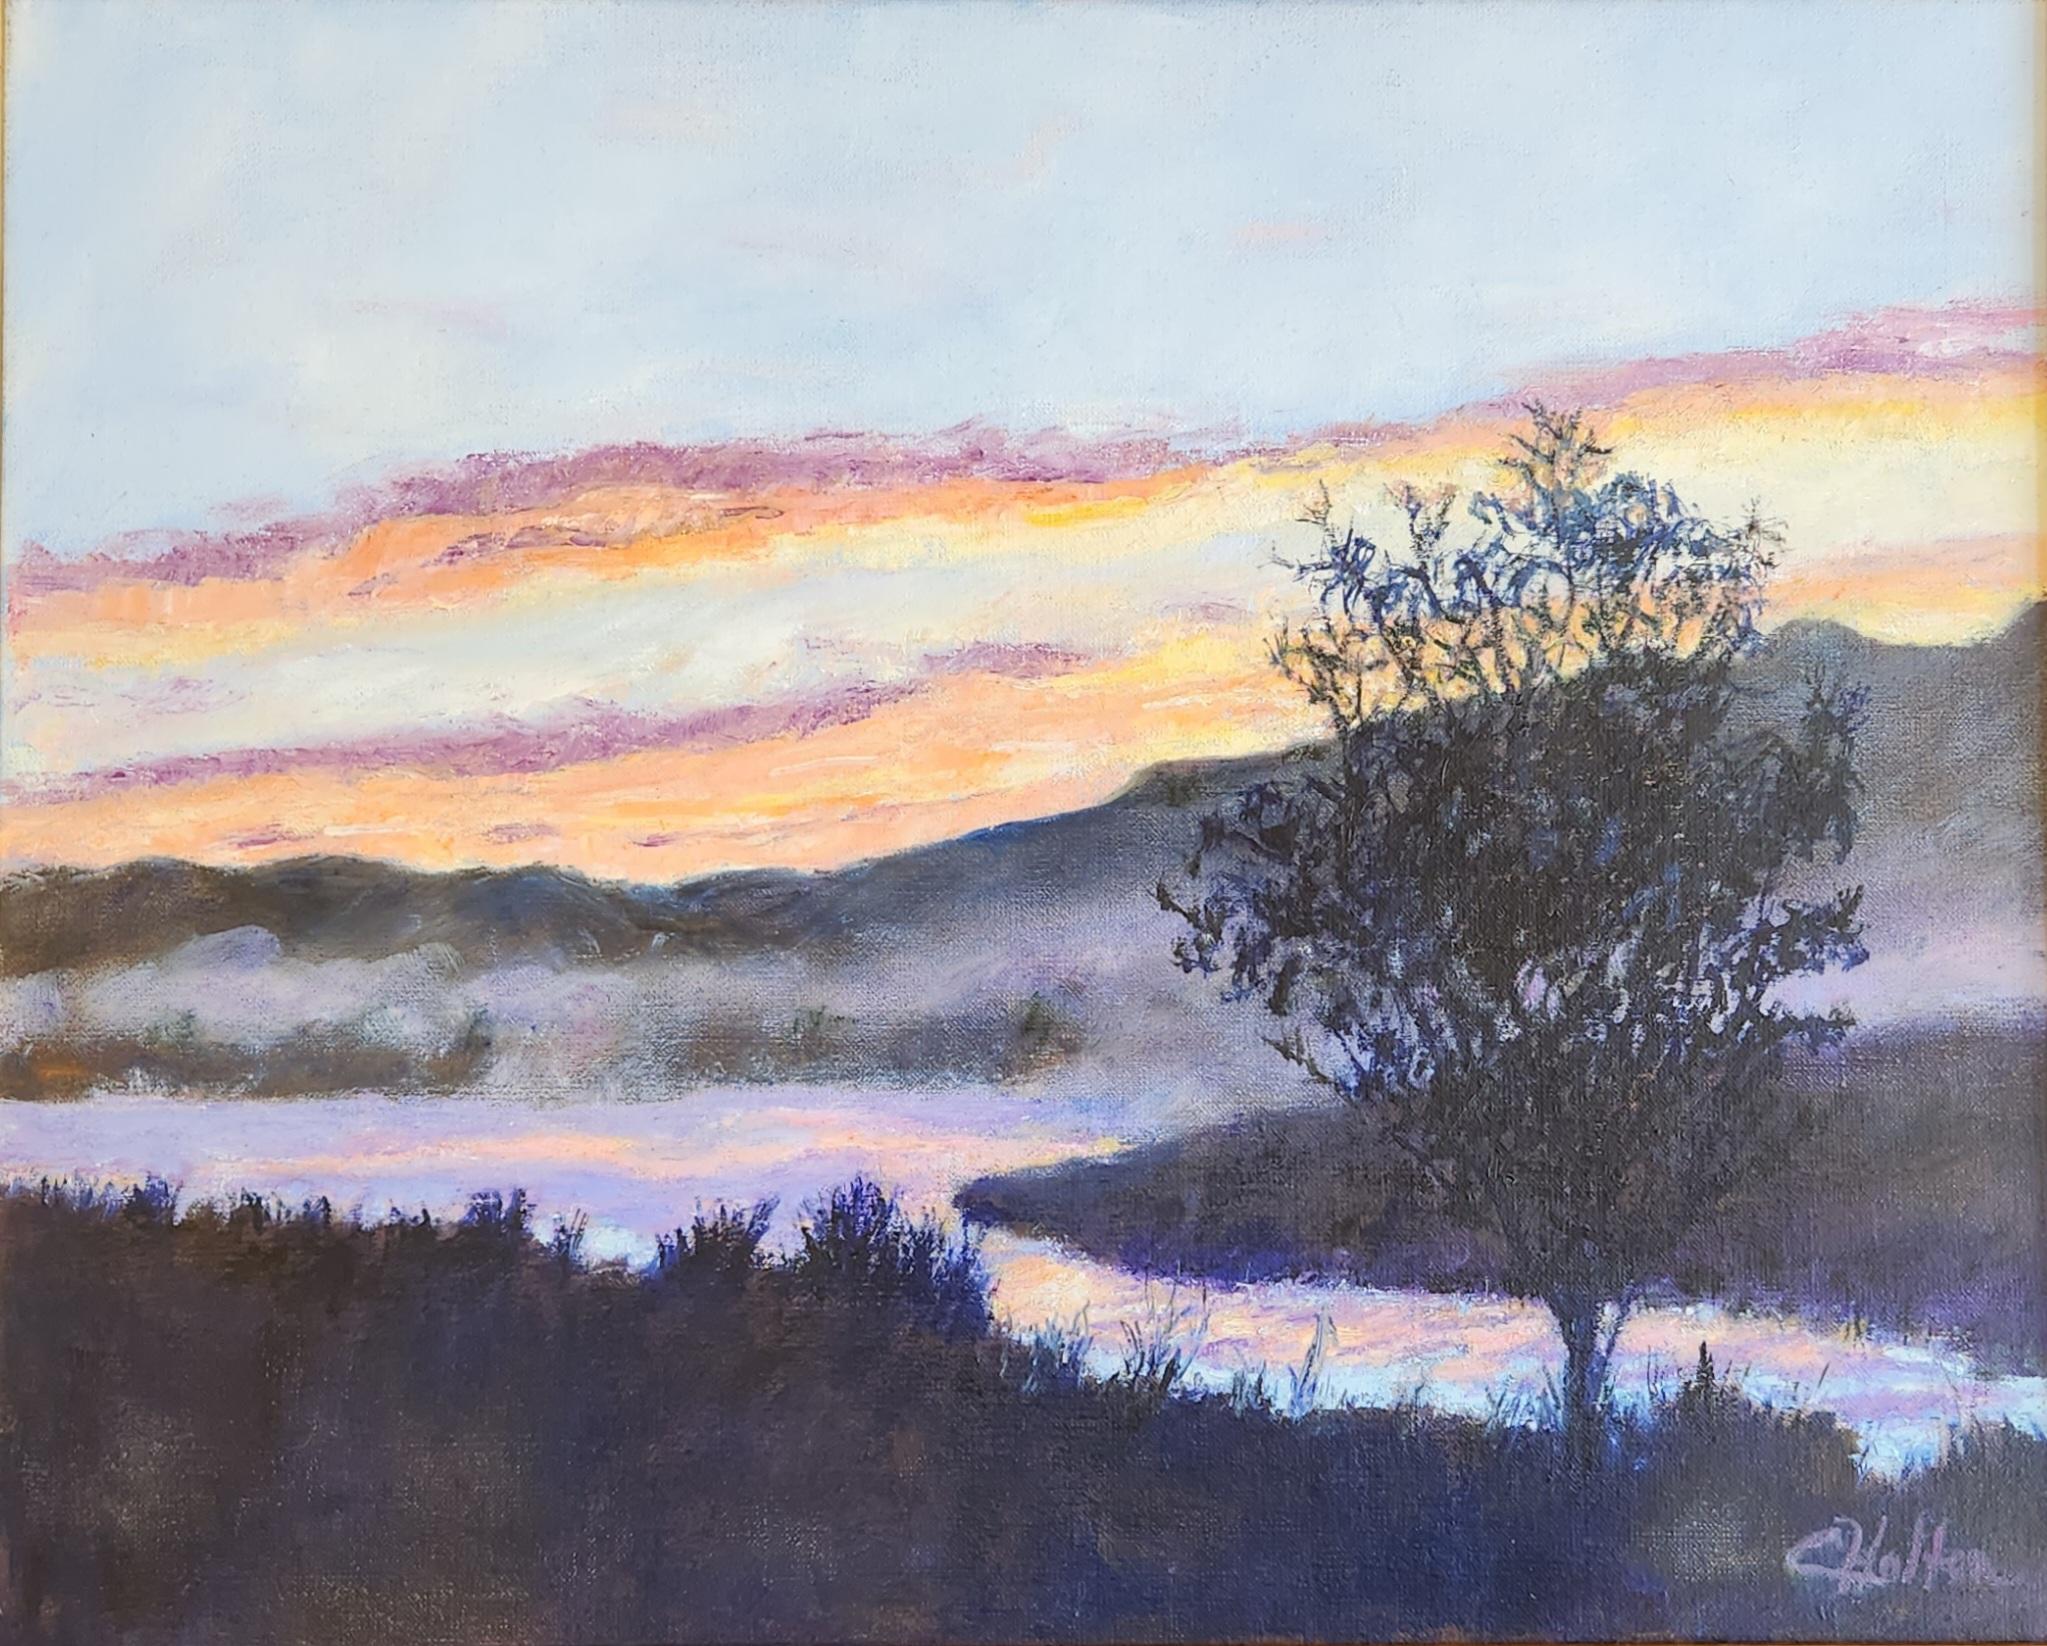 Oil on Linen painting -- Summer Solstice - Painting by Conard Holton